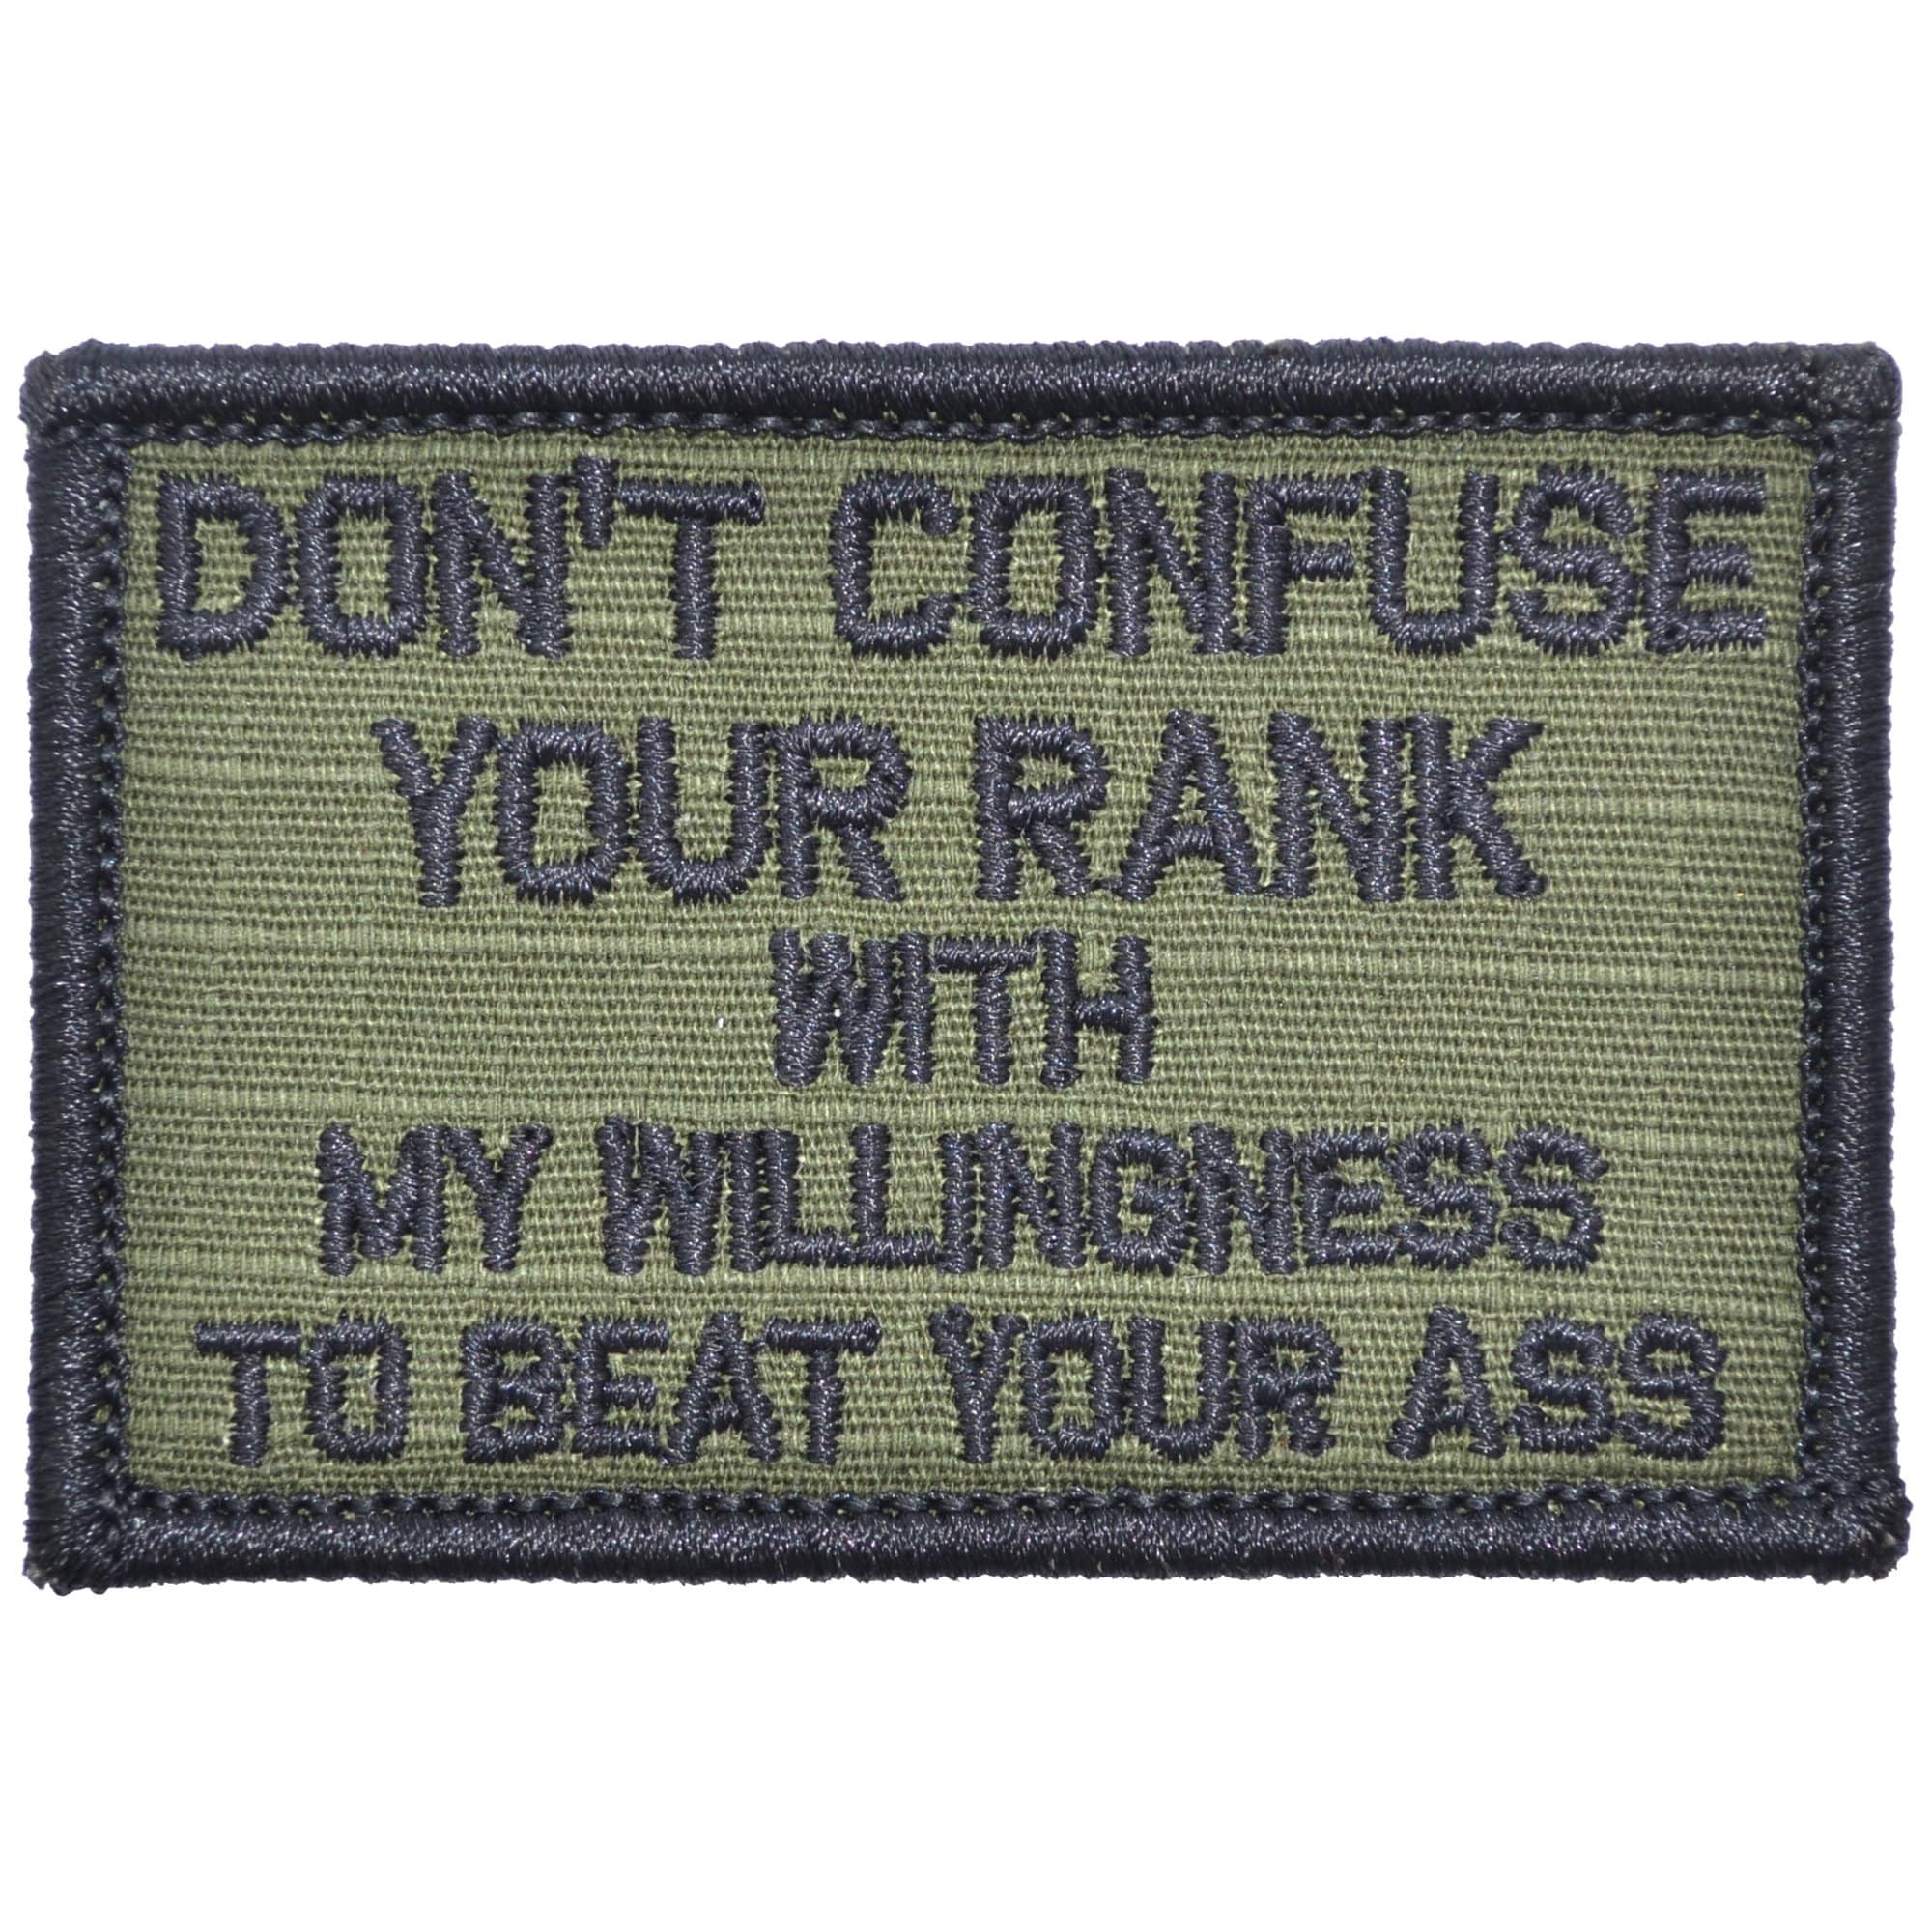 Tactical Gear Junkie Patches Olive Drab Don't Confuse Your Rank With My Willingness To Beat Your Ass - 2x3 Patch